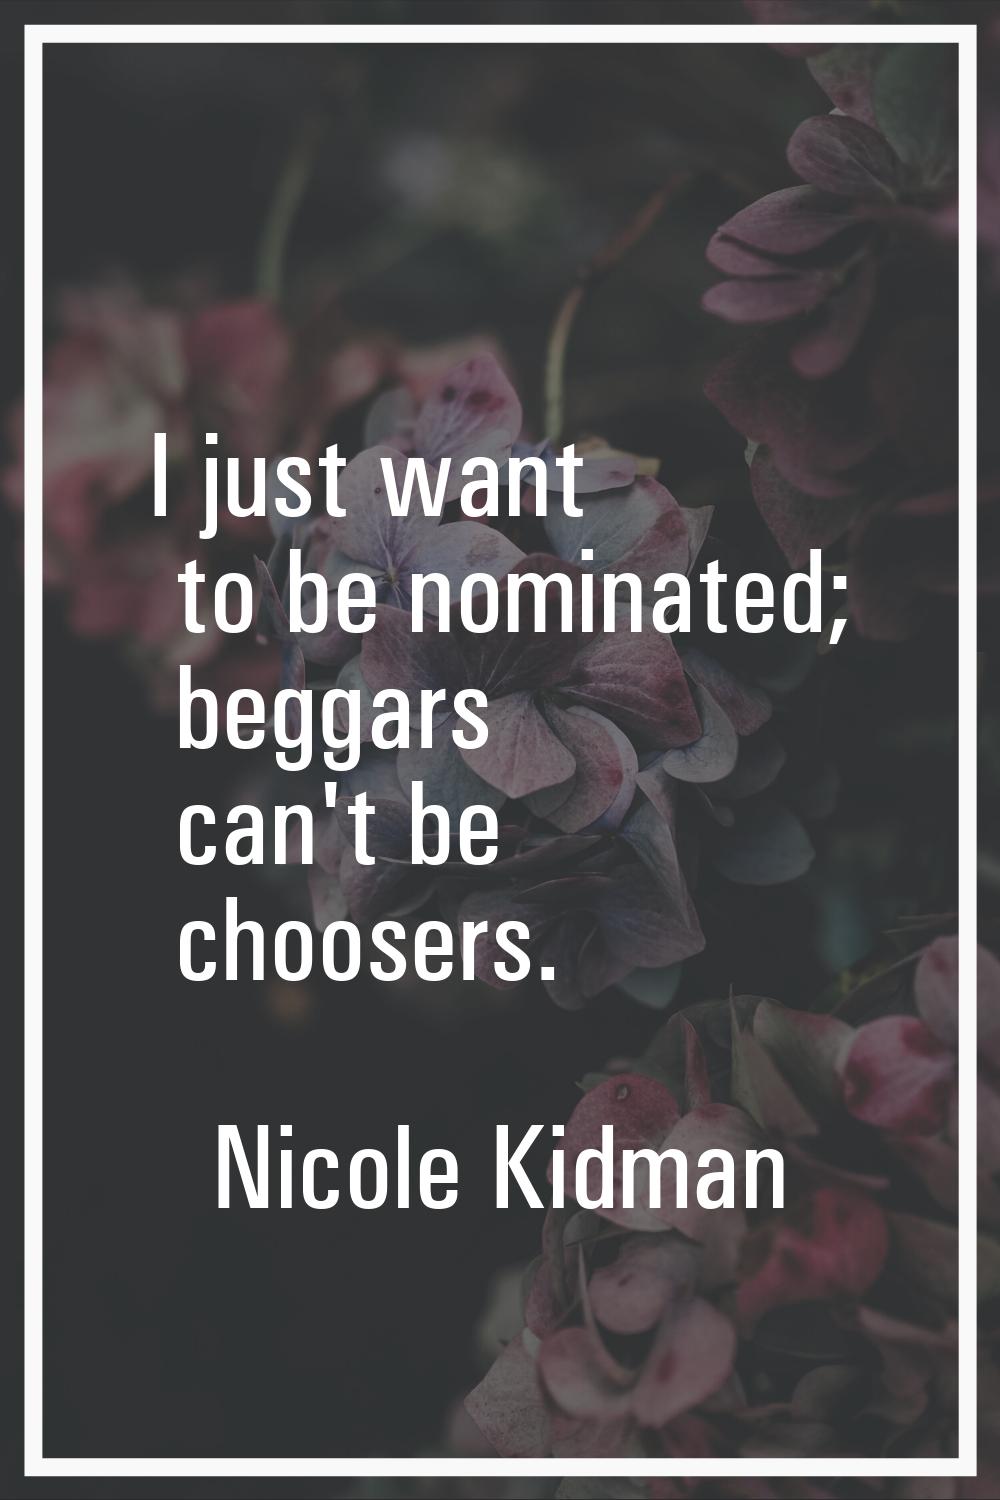 I just want to be nominated; beggars can't be choosers.